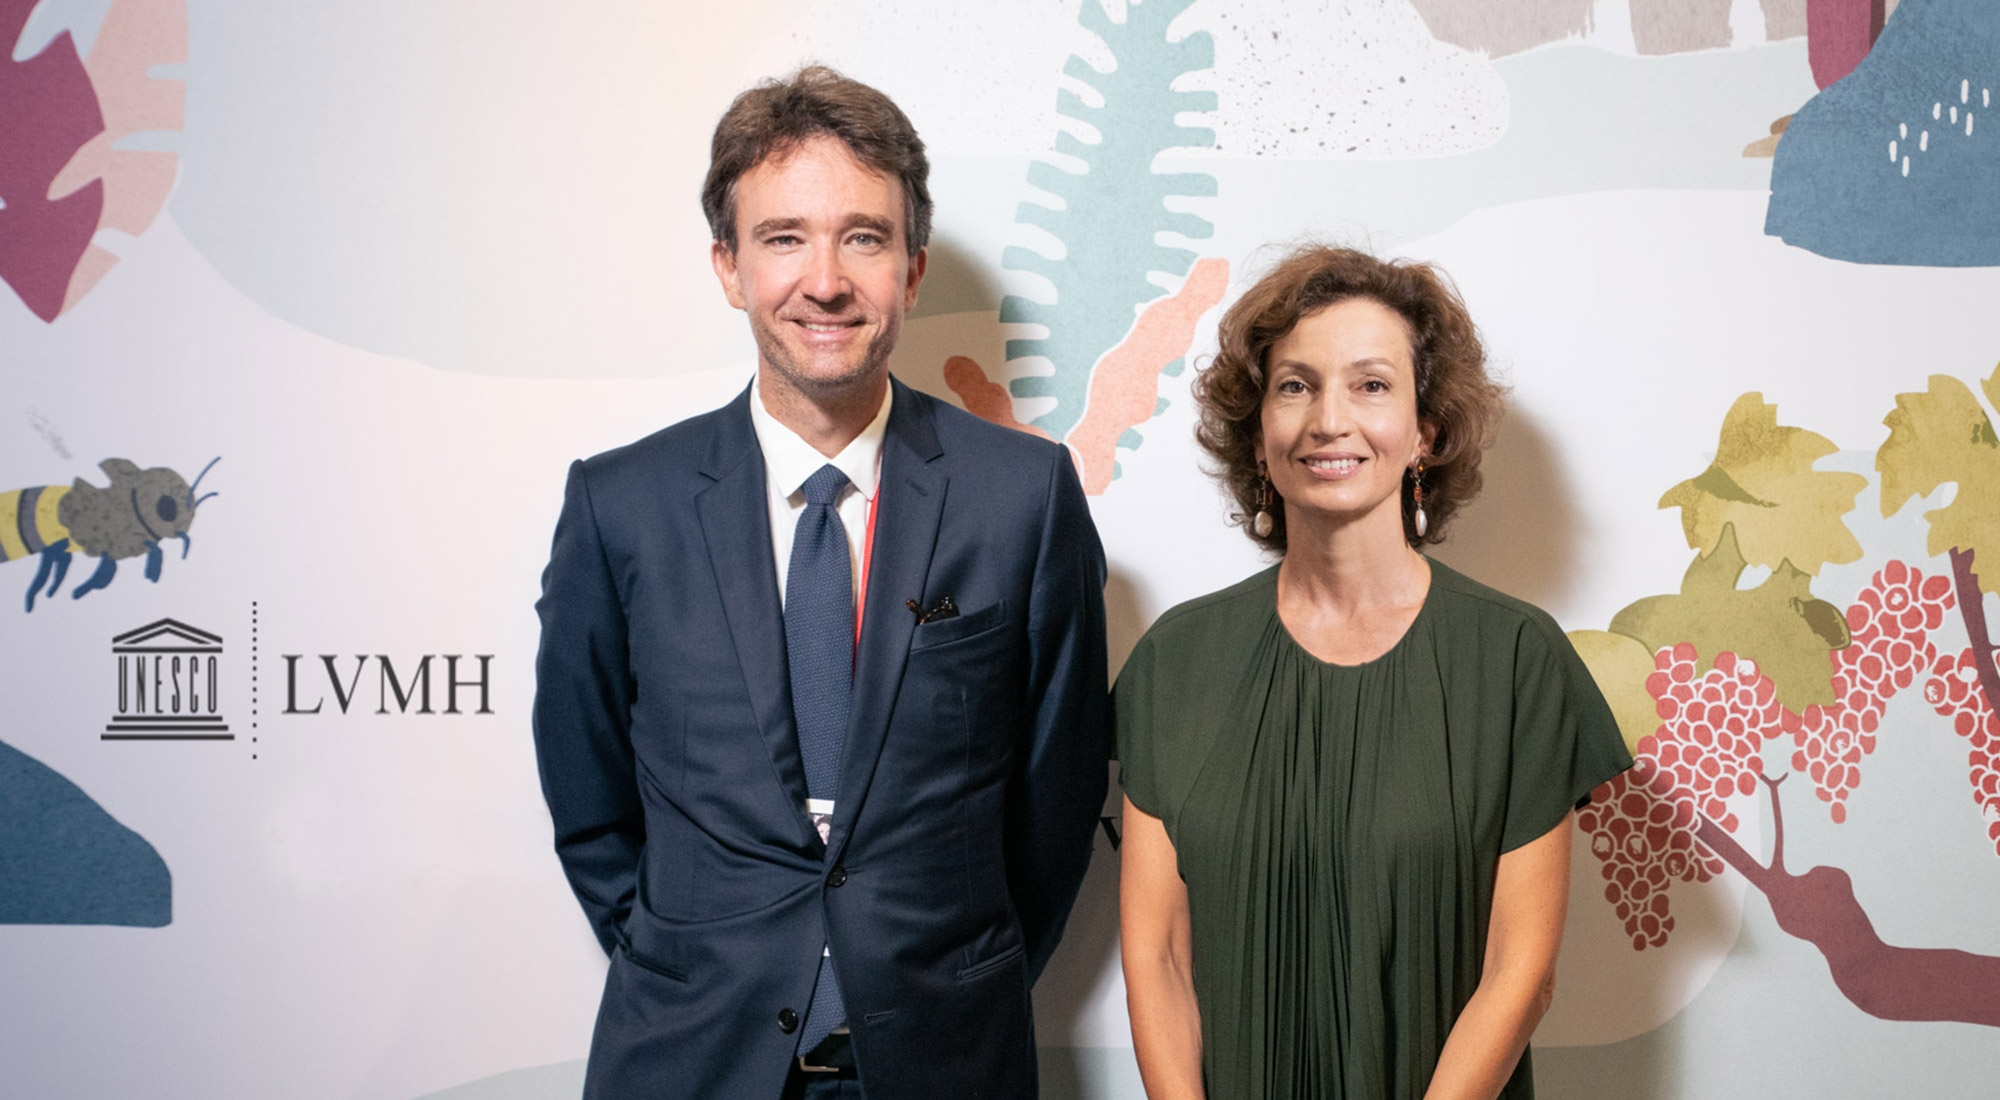 LVMH - The LVMH Institut des Métiers d'Excellence “is continually expanding  in France and other countries where there is an attractive pool of  potential talent and where LVMH is present”, explains Chantal